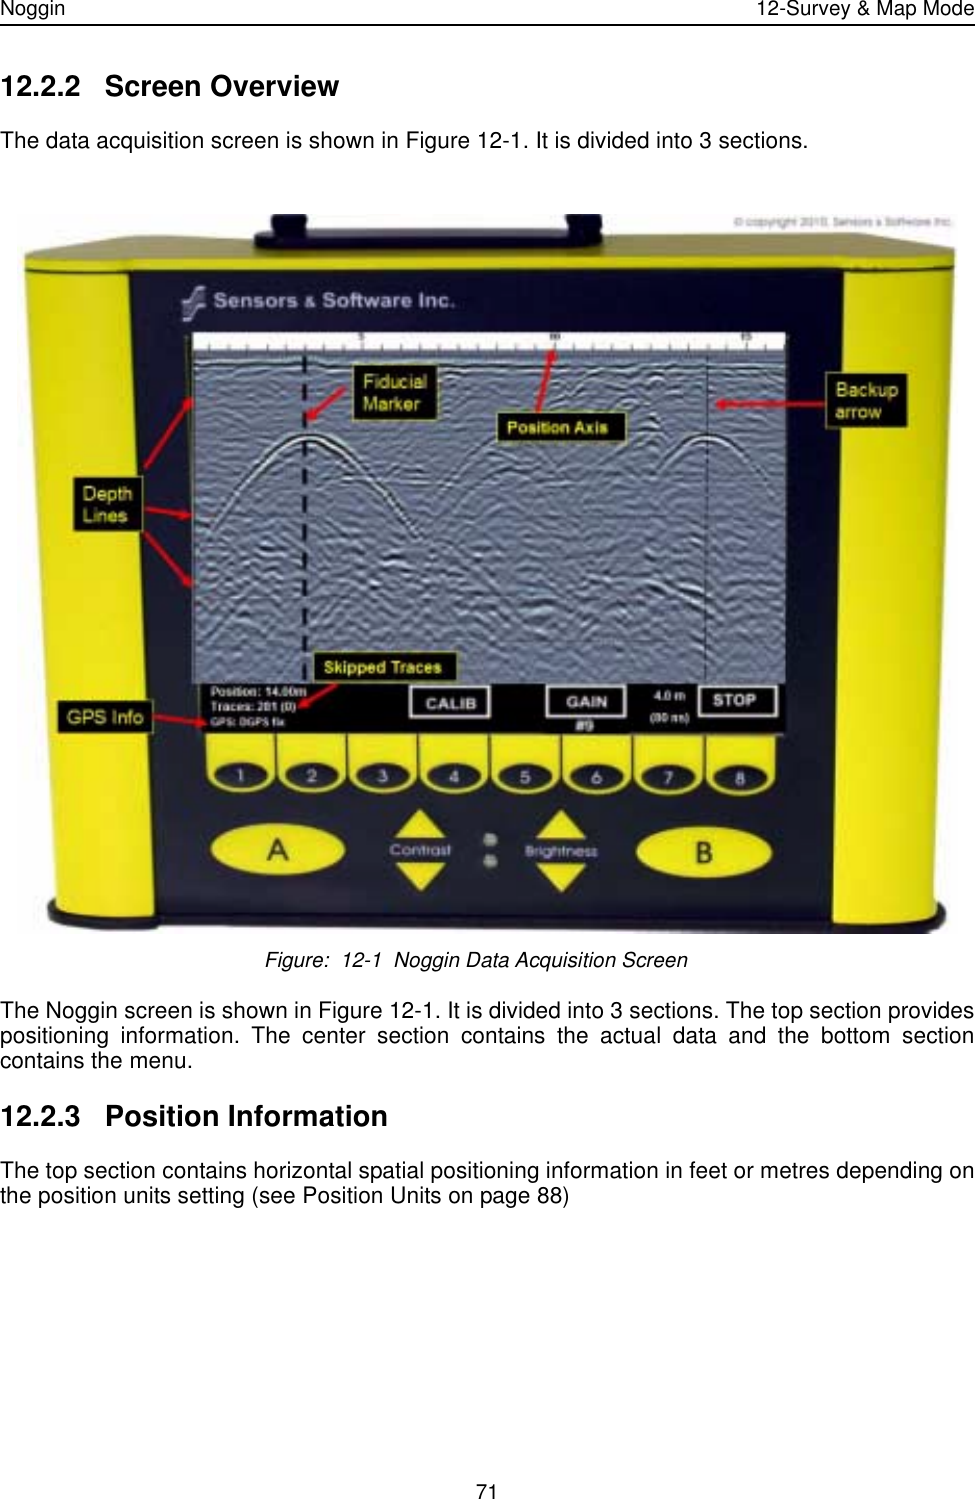 Noggin 12-Survey &amp; Map Mode7112.2.2 Screen OverviewThe data acquisition screen is shown in Figure 12-1. It is divided into 3 sections.  Figure:  12-1  Noggin Data Acquisition ScreenThe Noggin screen is shown in Figure 12-1. It is divided into 3 sections. The top section providespositioning information. The center section contains the actual data and the bottom sectioncontains the menu.12.2.3 Position InformationThe top section contains horizontal spatial positioning information in feet or metres depending onthe position units setting (see Position Units on page 88)